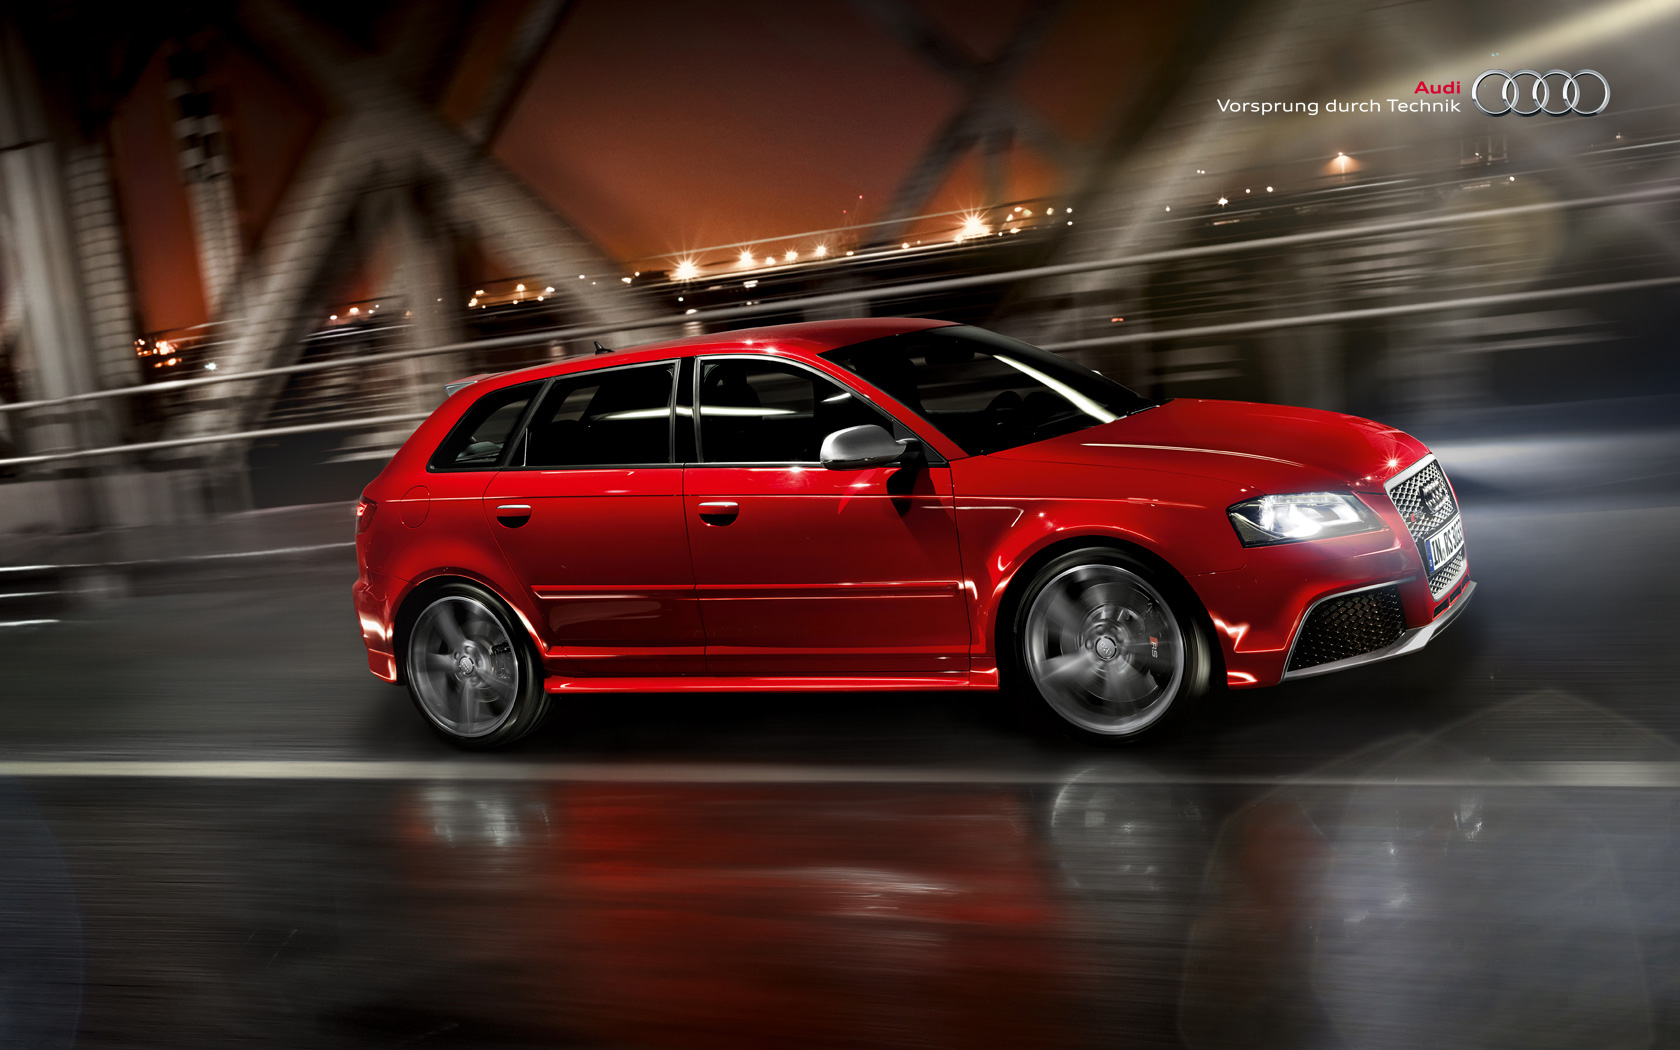 More Audi Rs3 Eye Candy - Audi Rs3 Wallpaper 8p , HD Wallpaper & Backgrounds